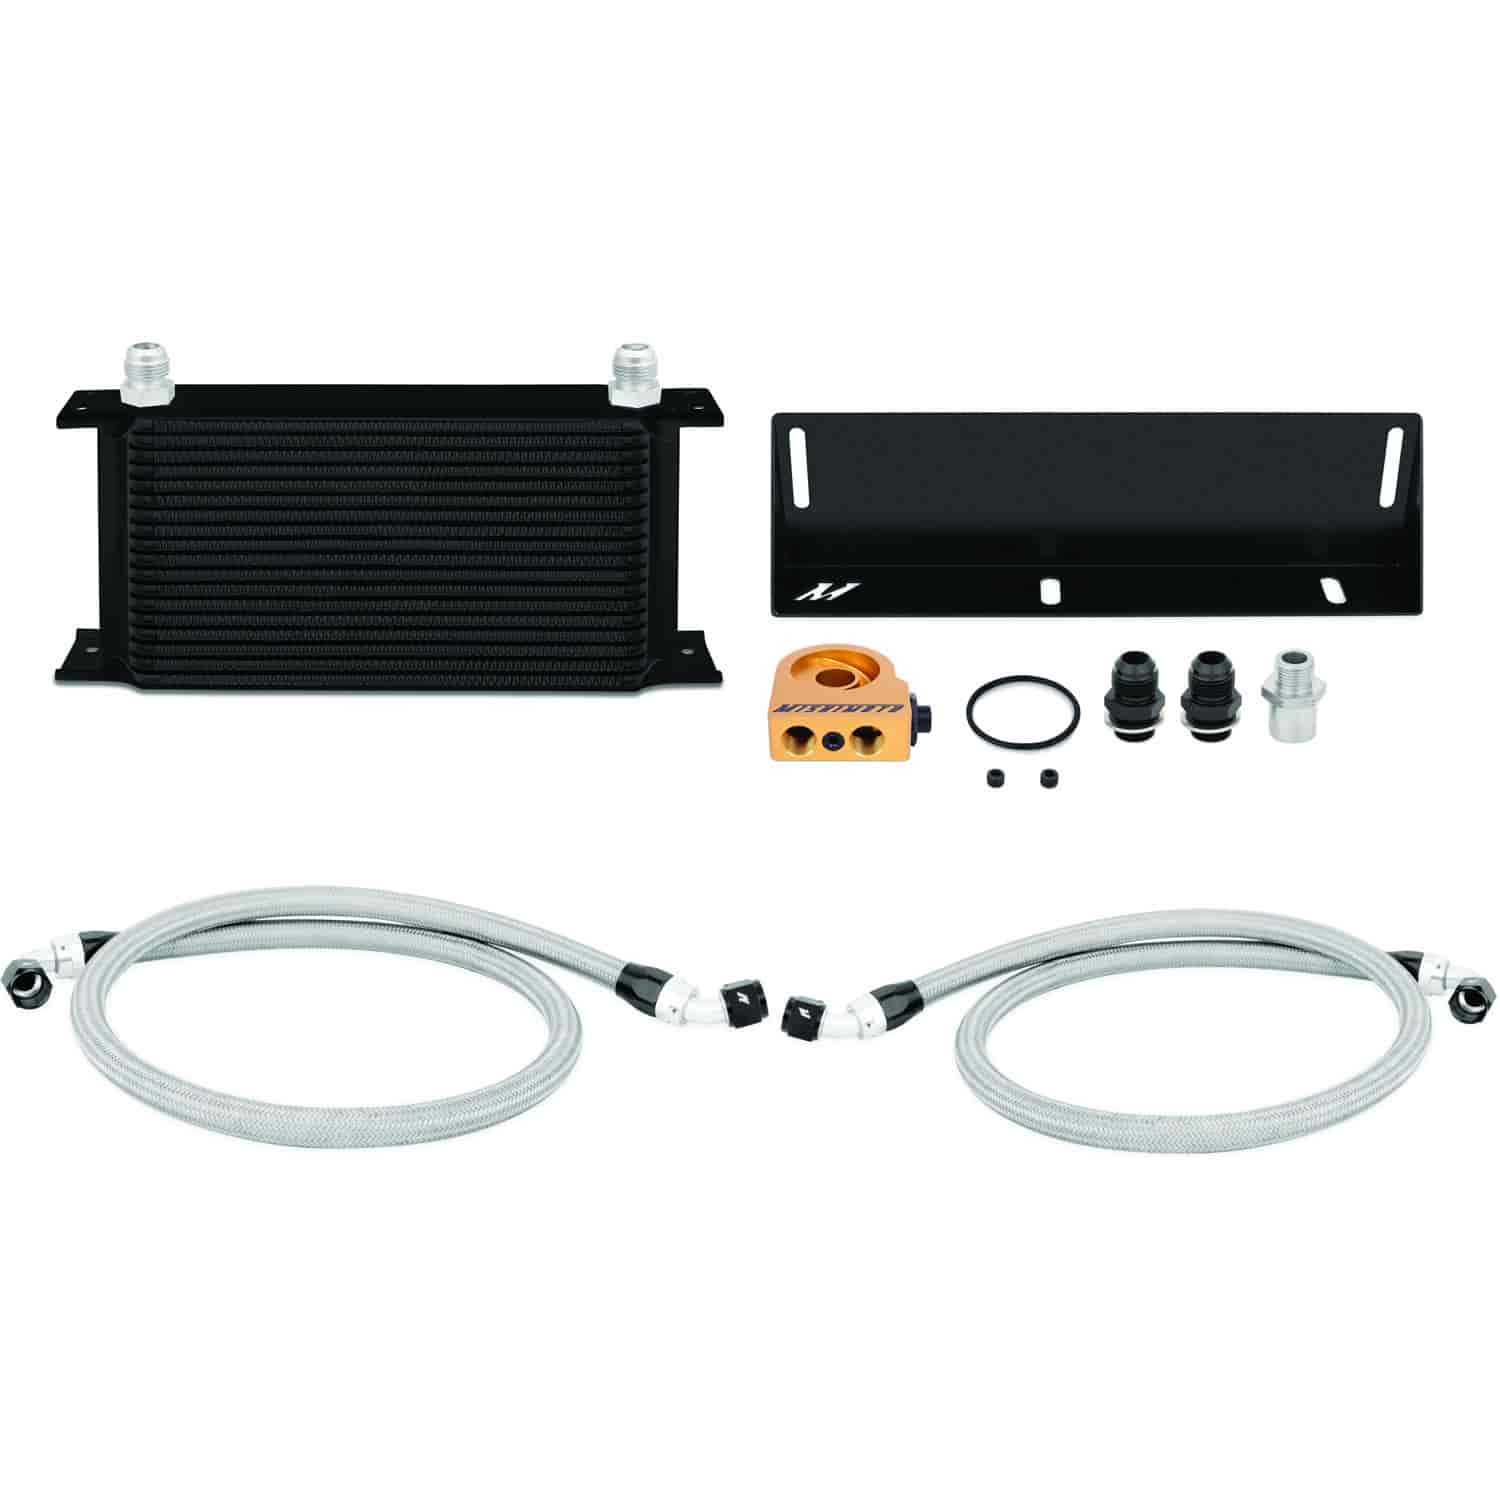 Ford Mustang 5.0L Thermostatic Oil Cooler Kit Black - MFG Part No. MMOC-MUS-79TBK